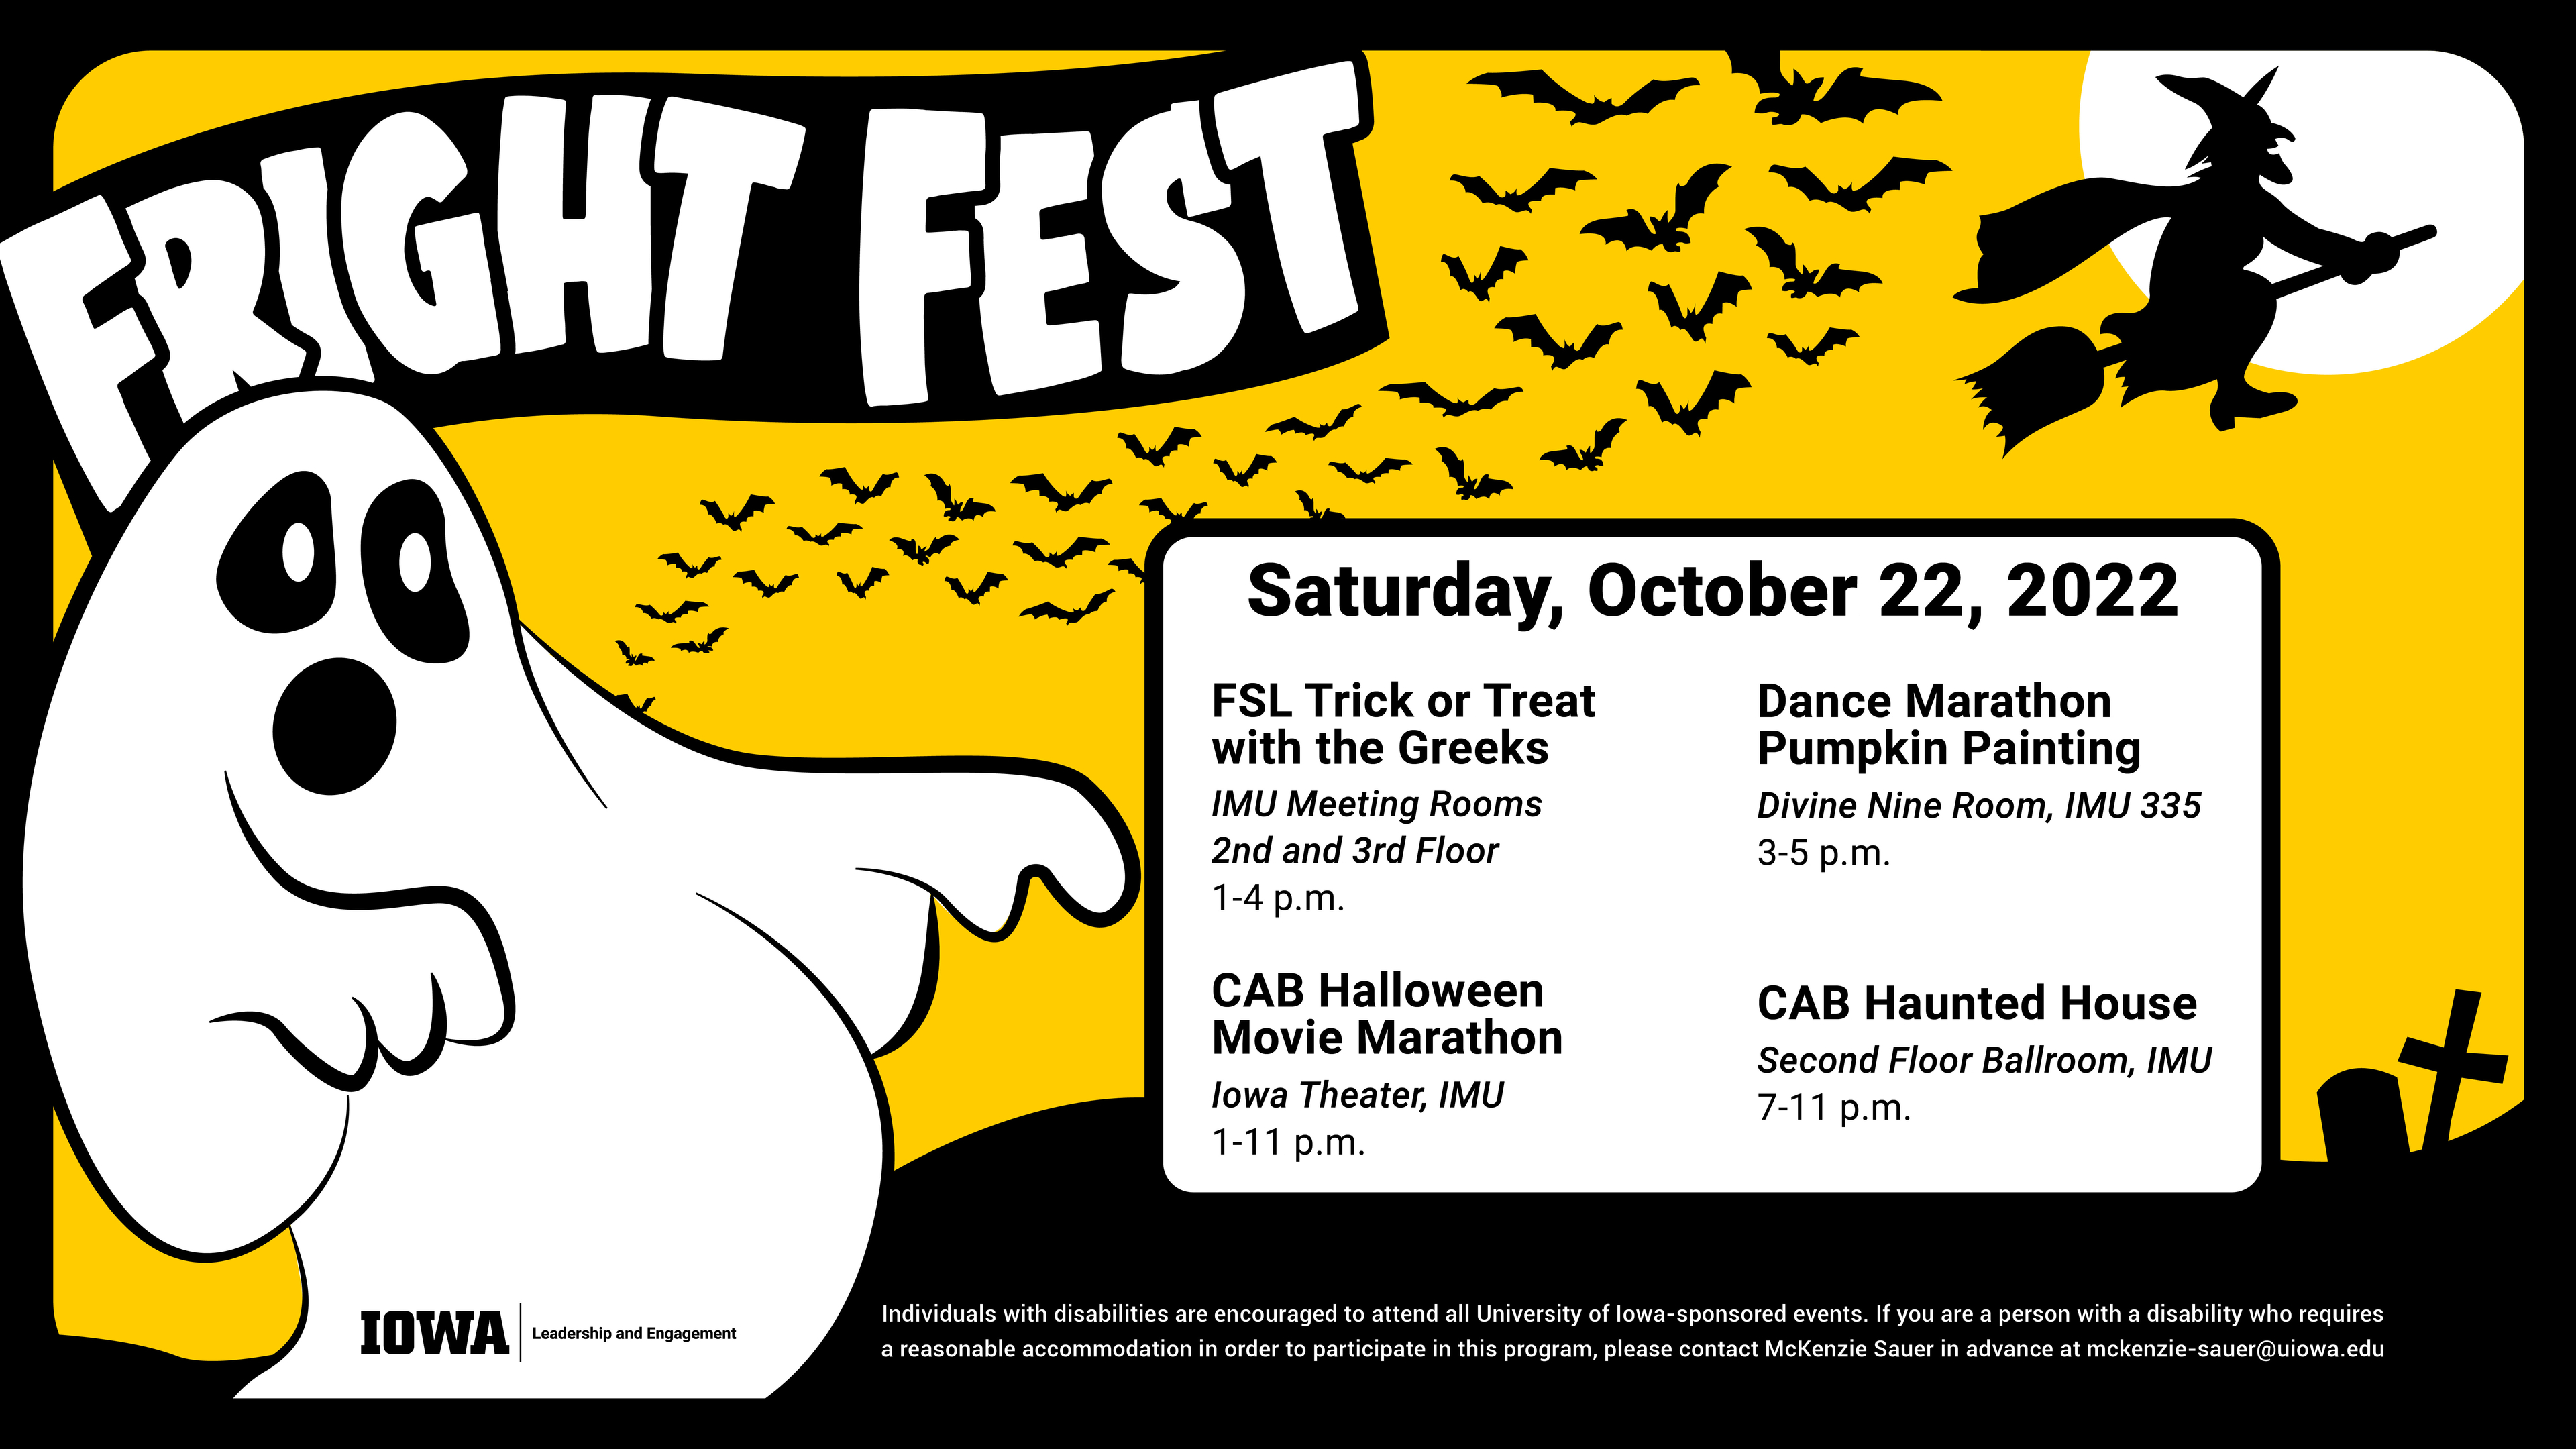 Fright Fest Saturday October 22, 2022. FSL Trick or Treat with the Greeks at the IMU 2nd and 3rd Floor Meeting Rooms 1-4pm. Dance Marathon Pumpkin Painting Divine Nine Room, IMU 3rd Floor 3-5pm. CAB Halloween Movie Marathon Iowa Theater, IMU 1-11pm. CAB Haunted House Second floor Ballroom, IMU 7-11pm.